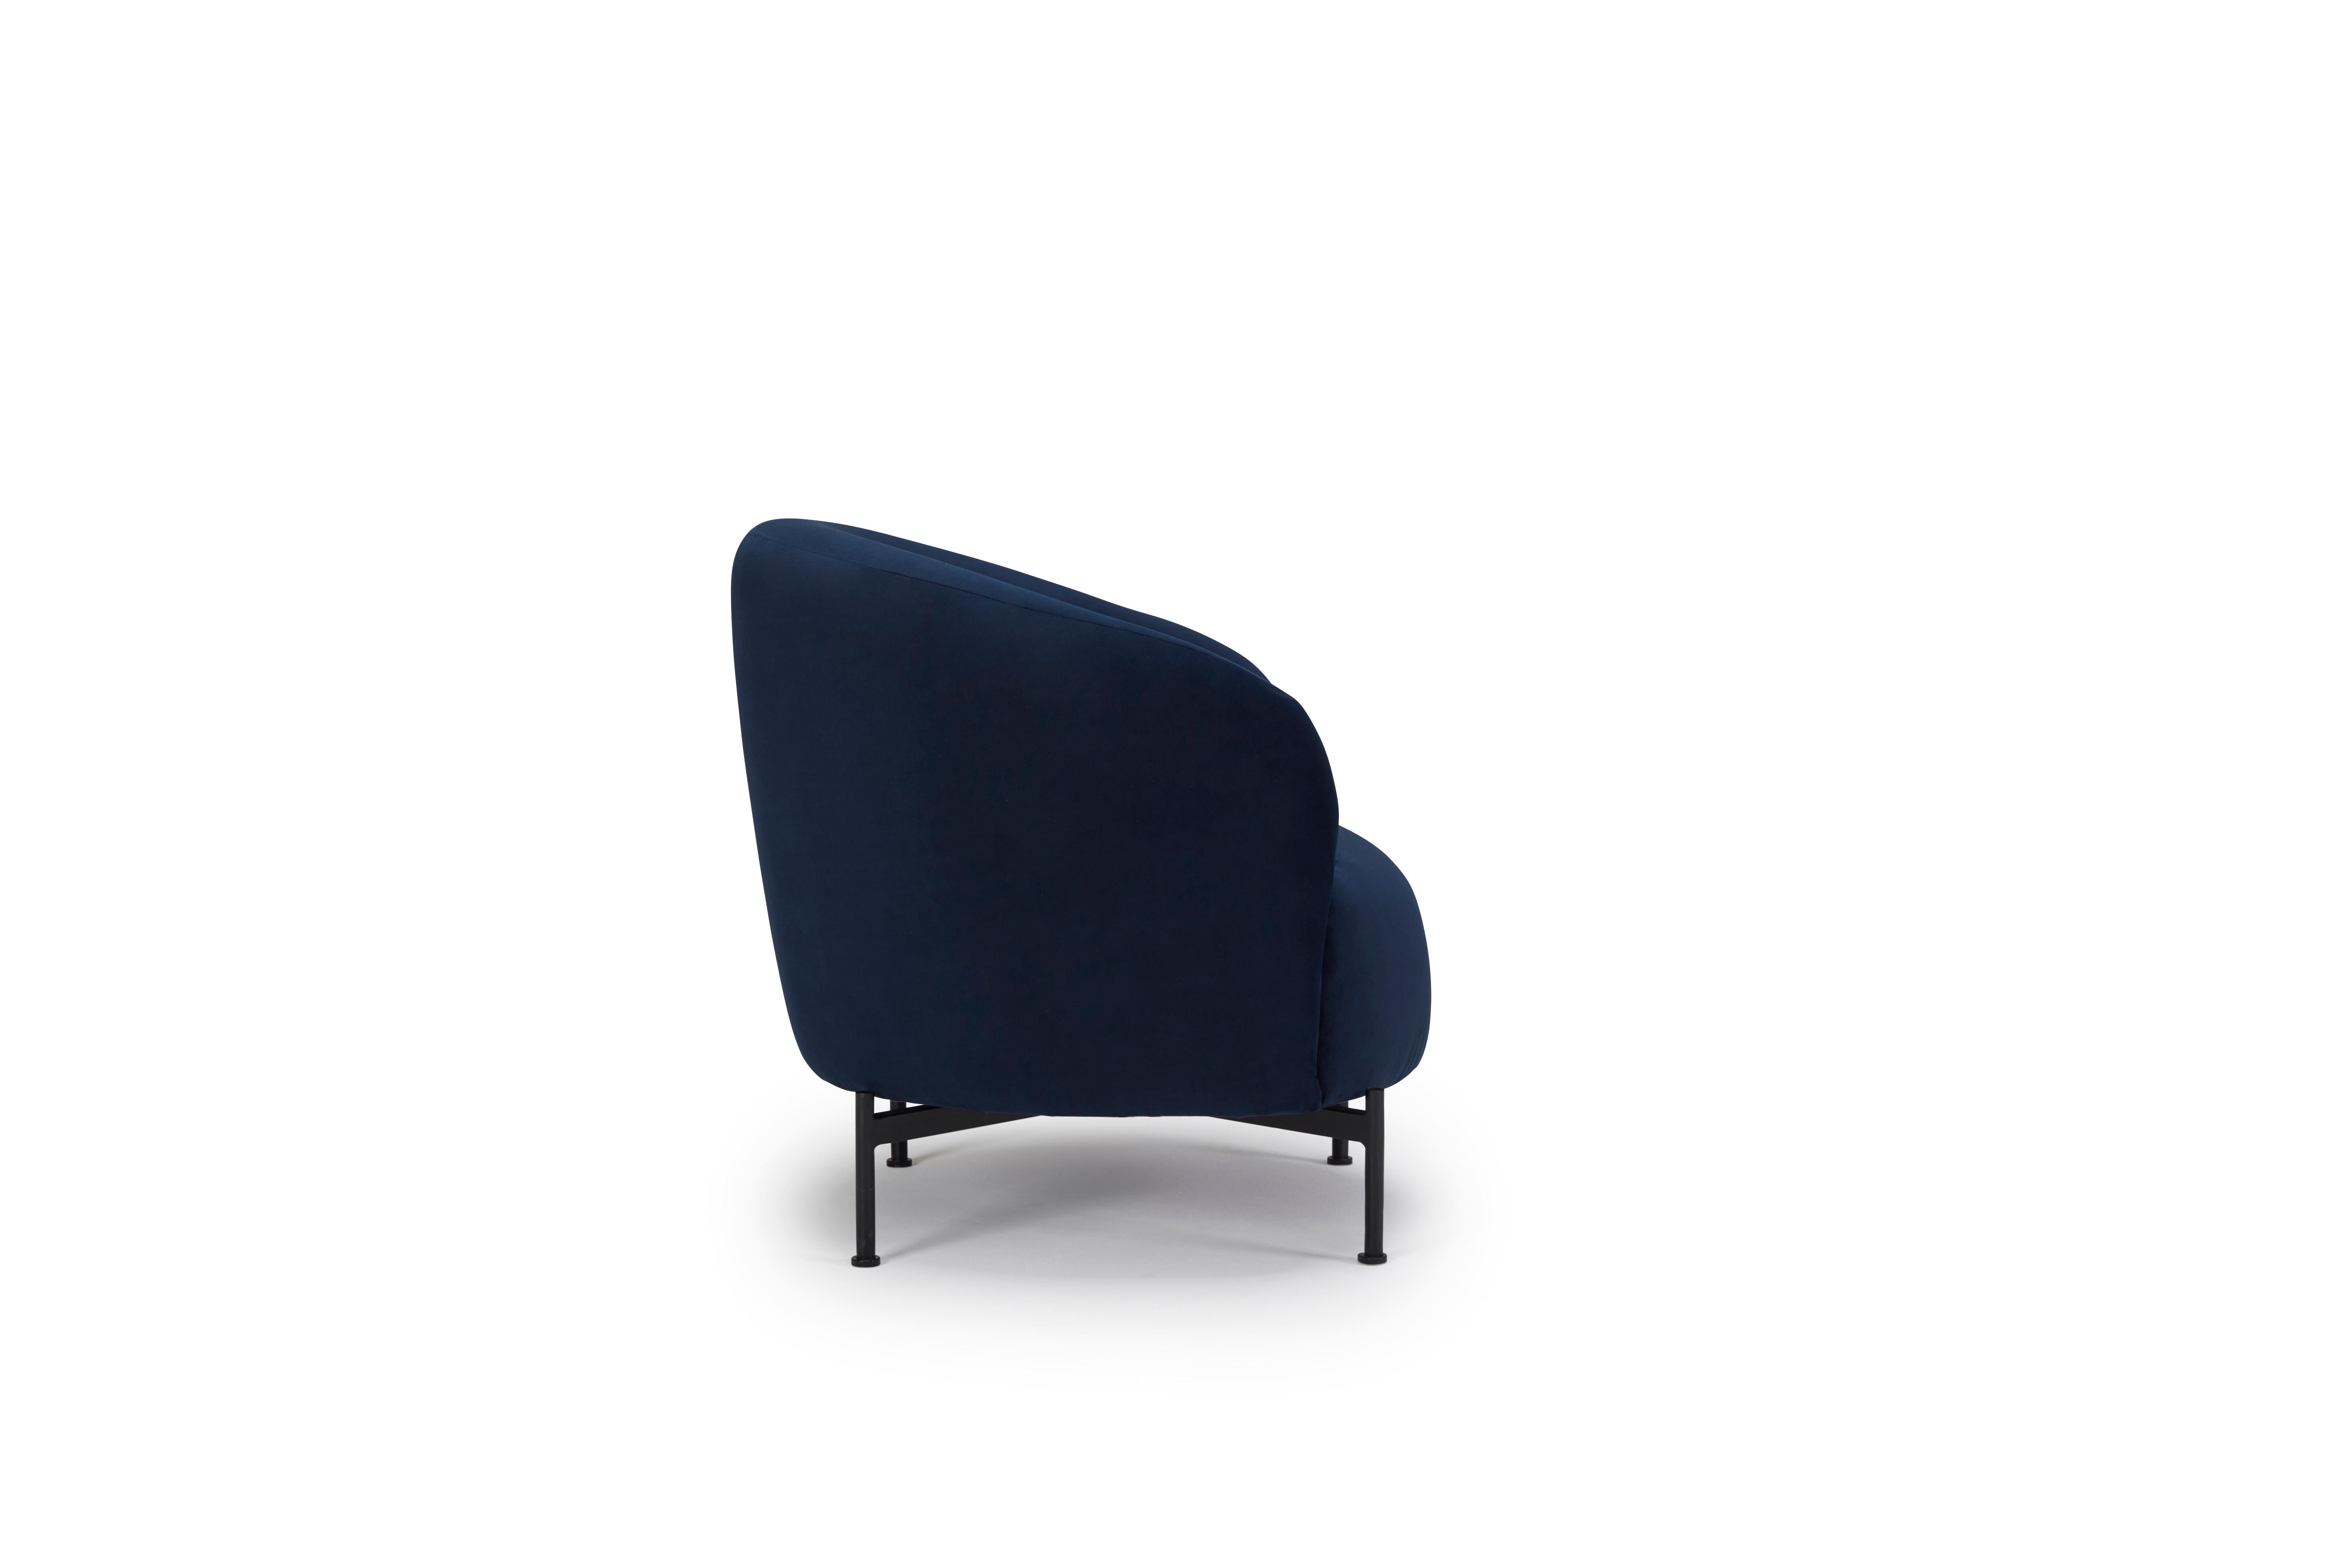 European Hayche Glover Armchair - Metal XBase - Blue, UK, Made to Order For Sale